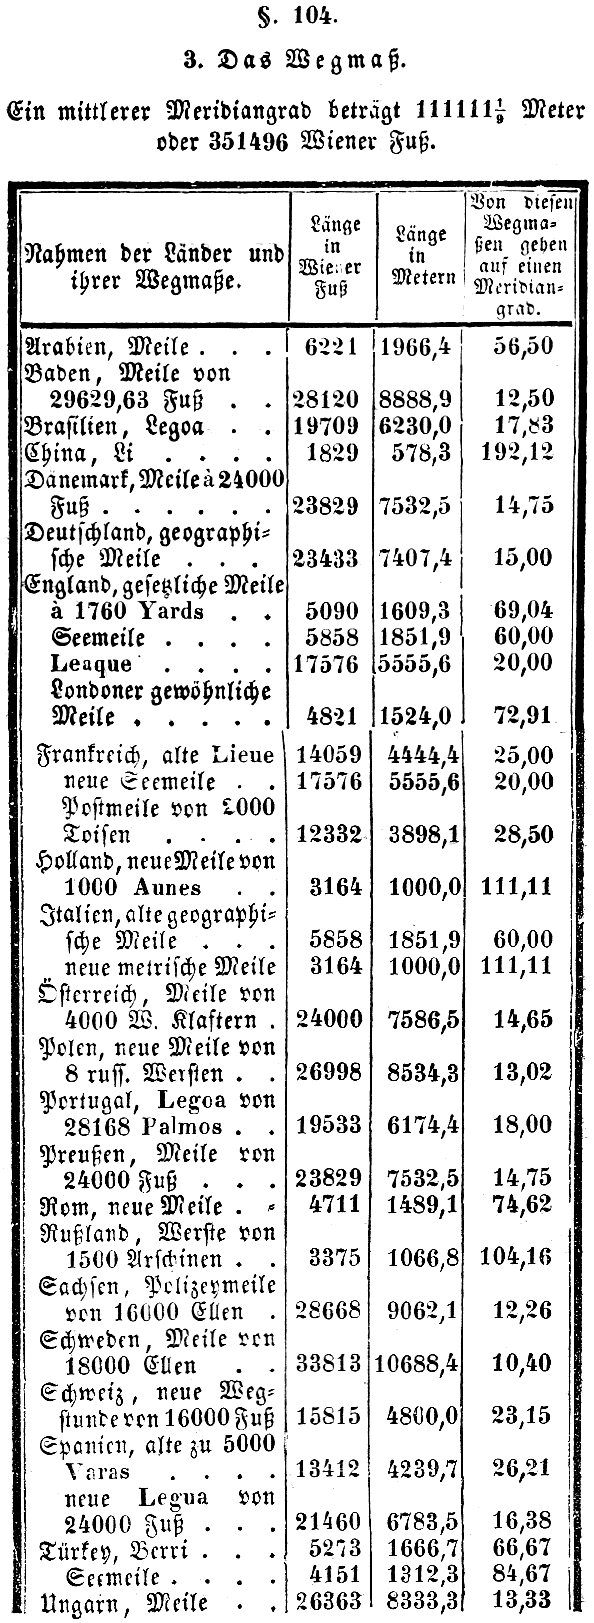 Various historic miles and leagues from an 1848 German textbook, given in feet, metres, and fractions of a meridian